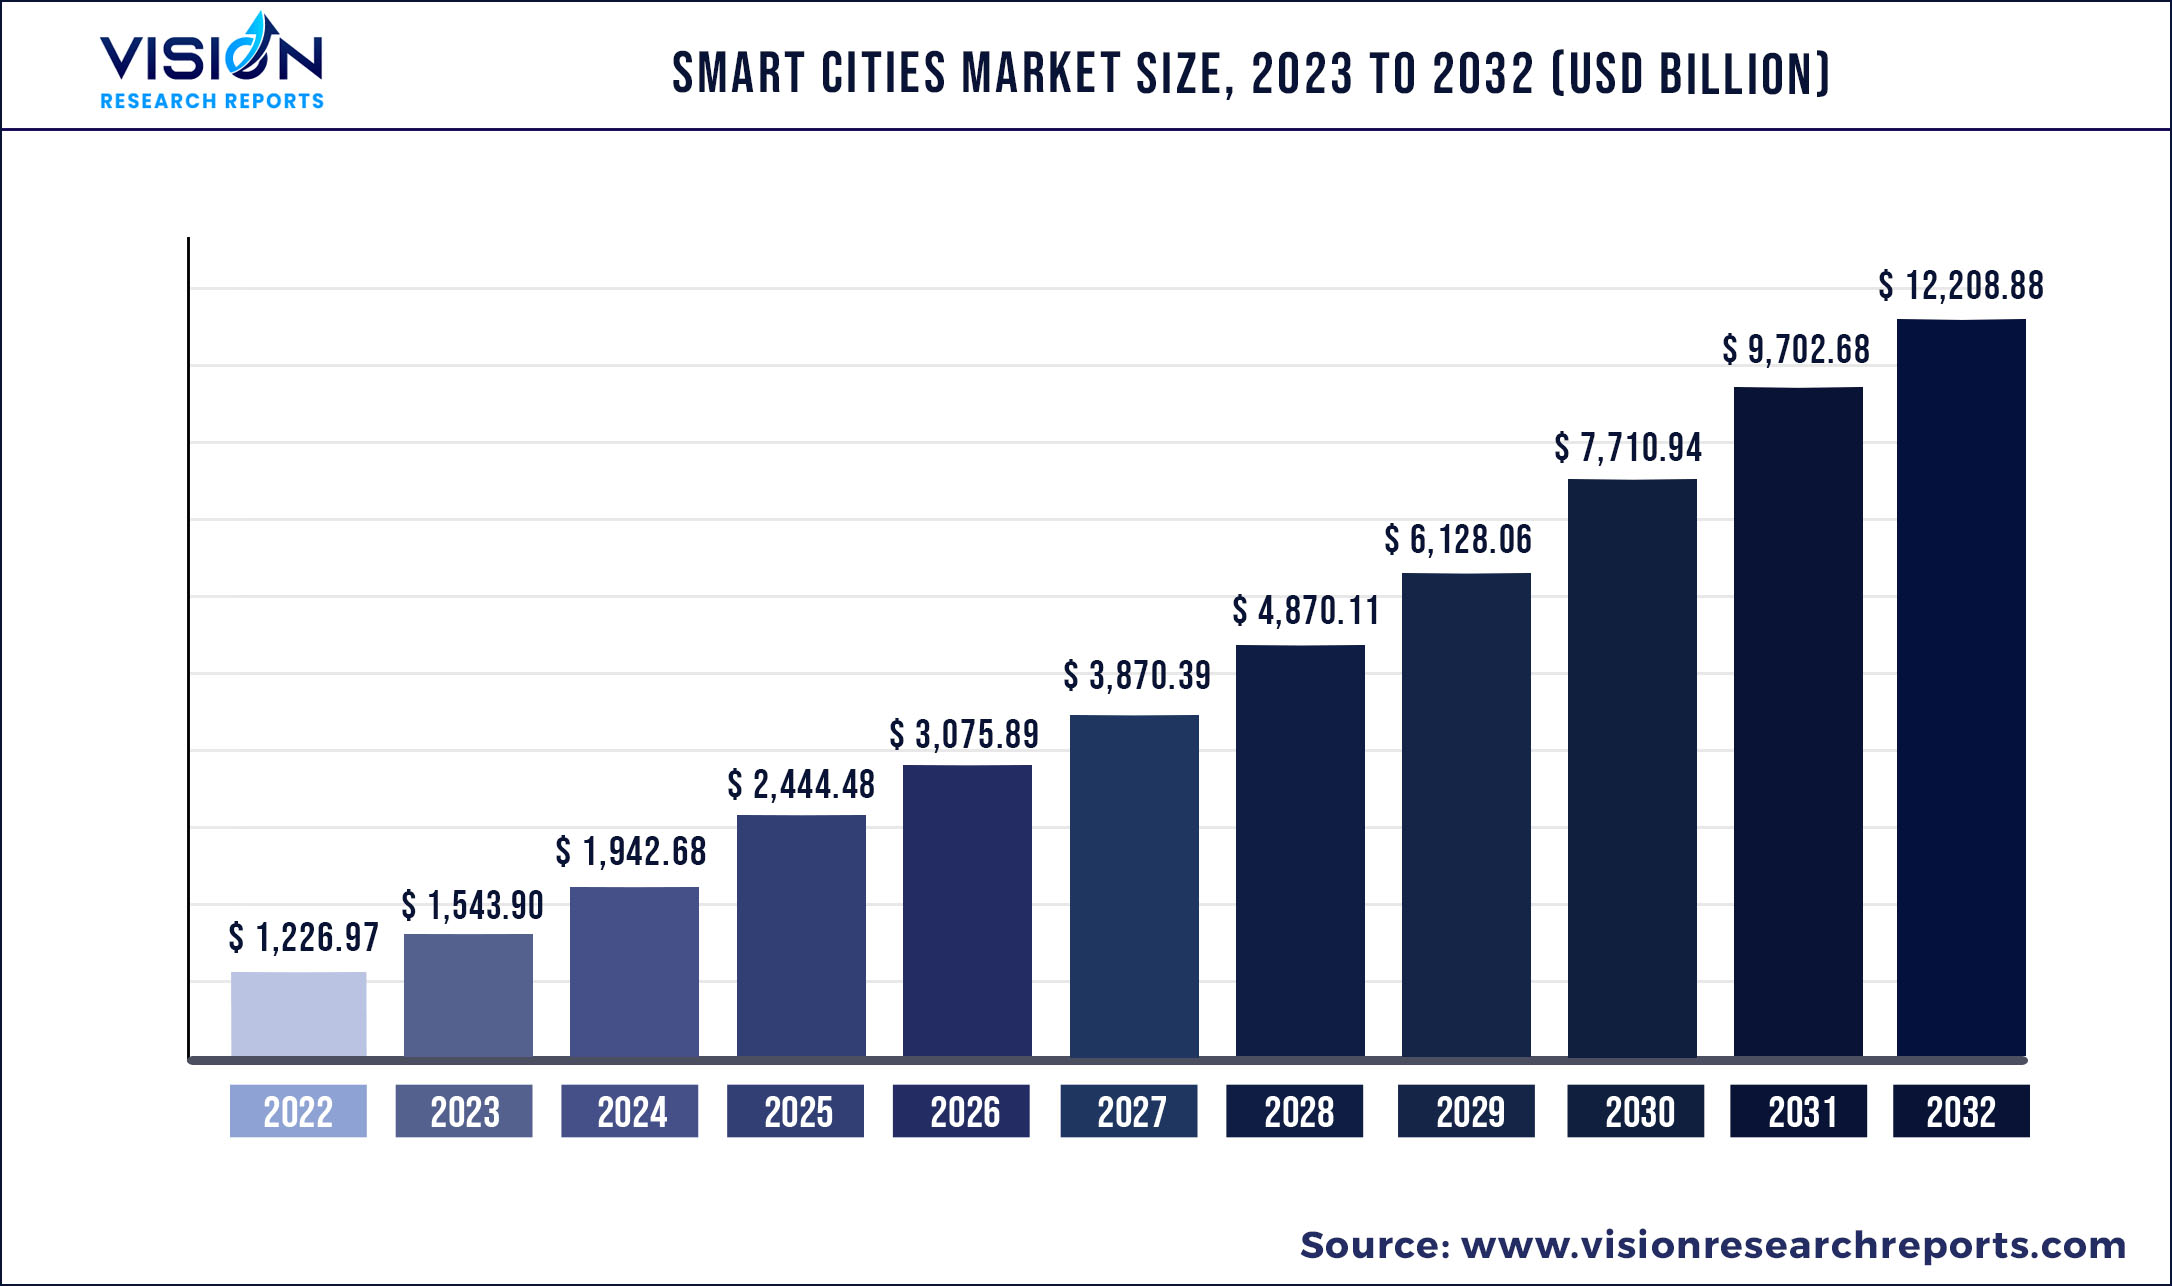 Smart Cities Market Size 2023 to 2032